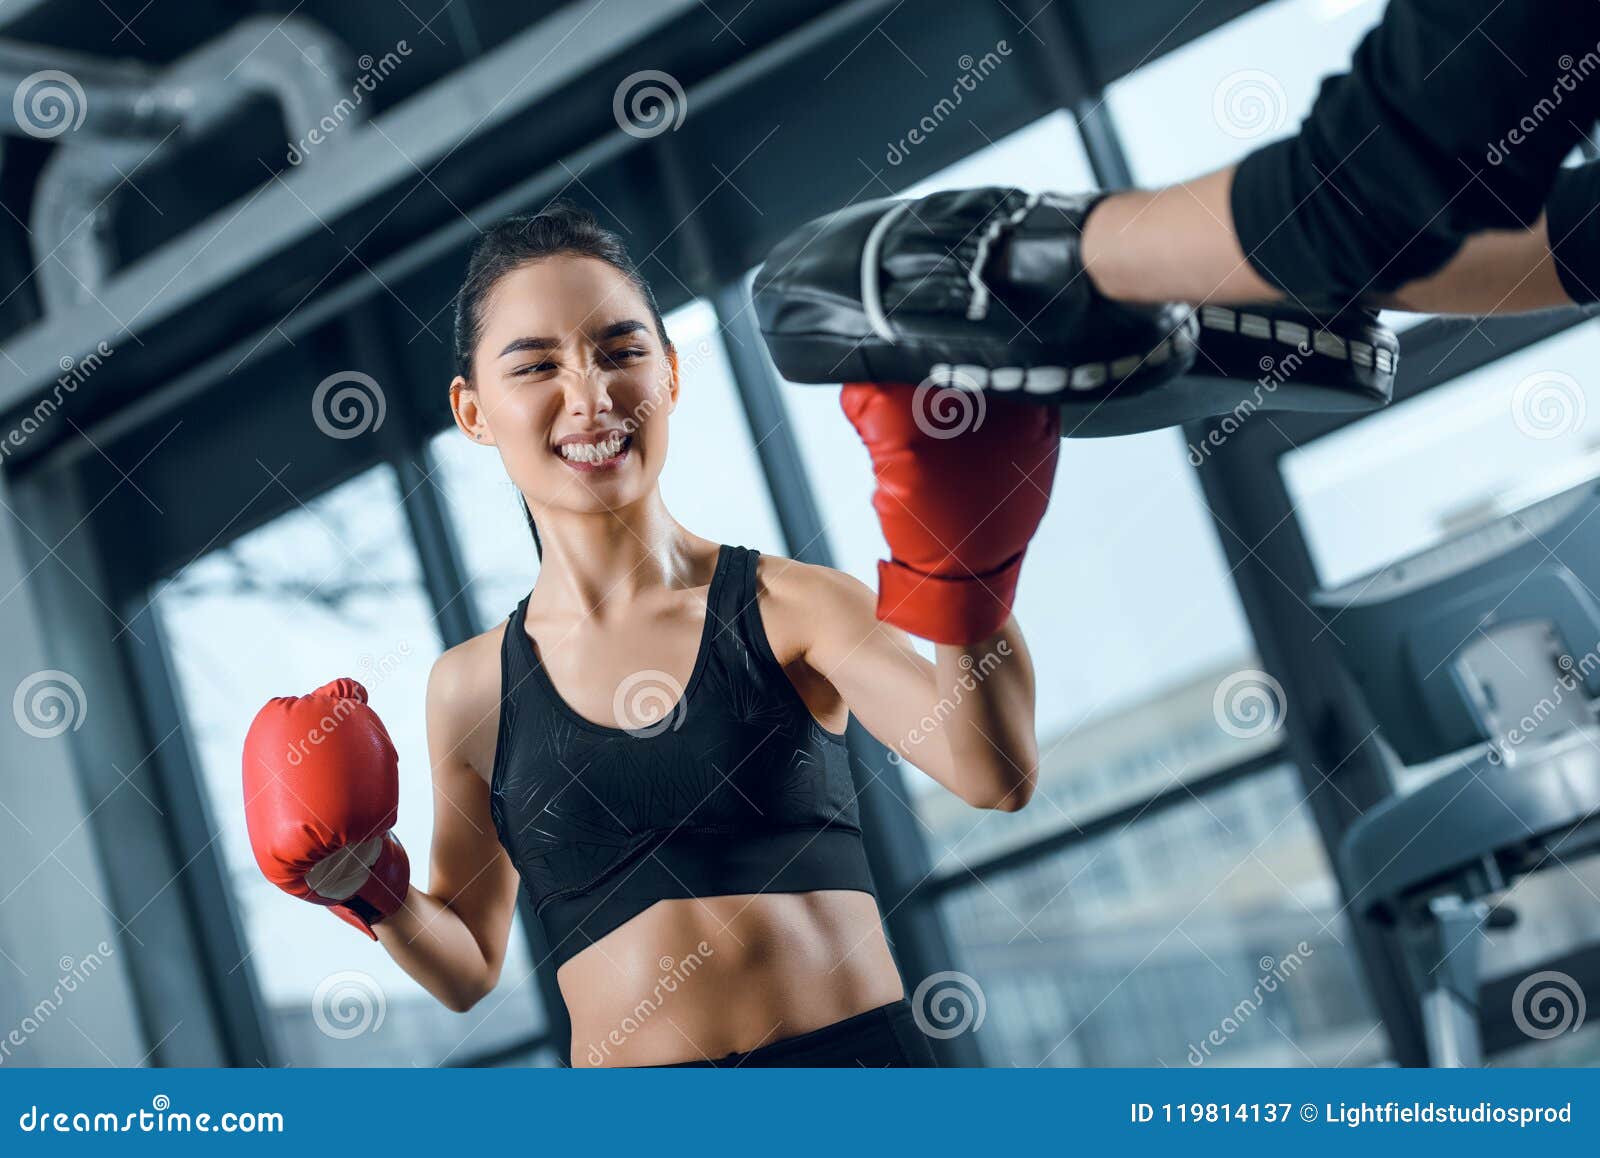 expressive young female boxer exercising with trainer